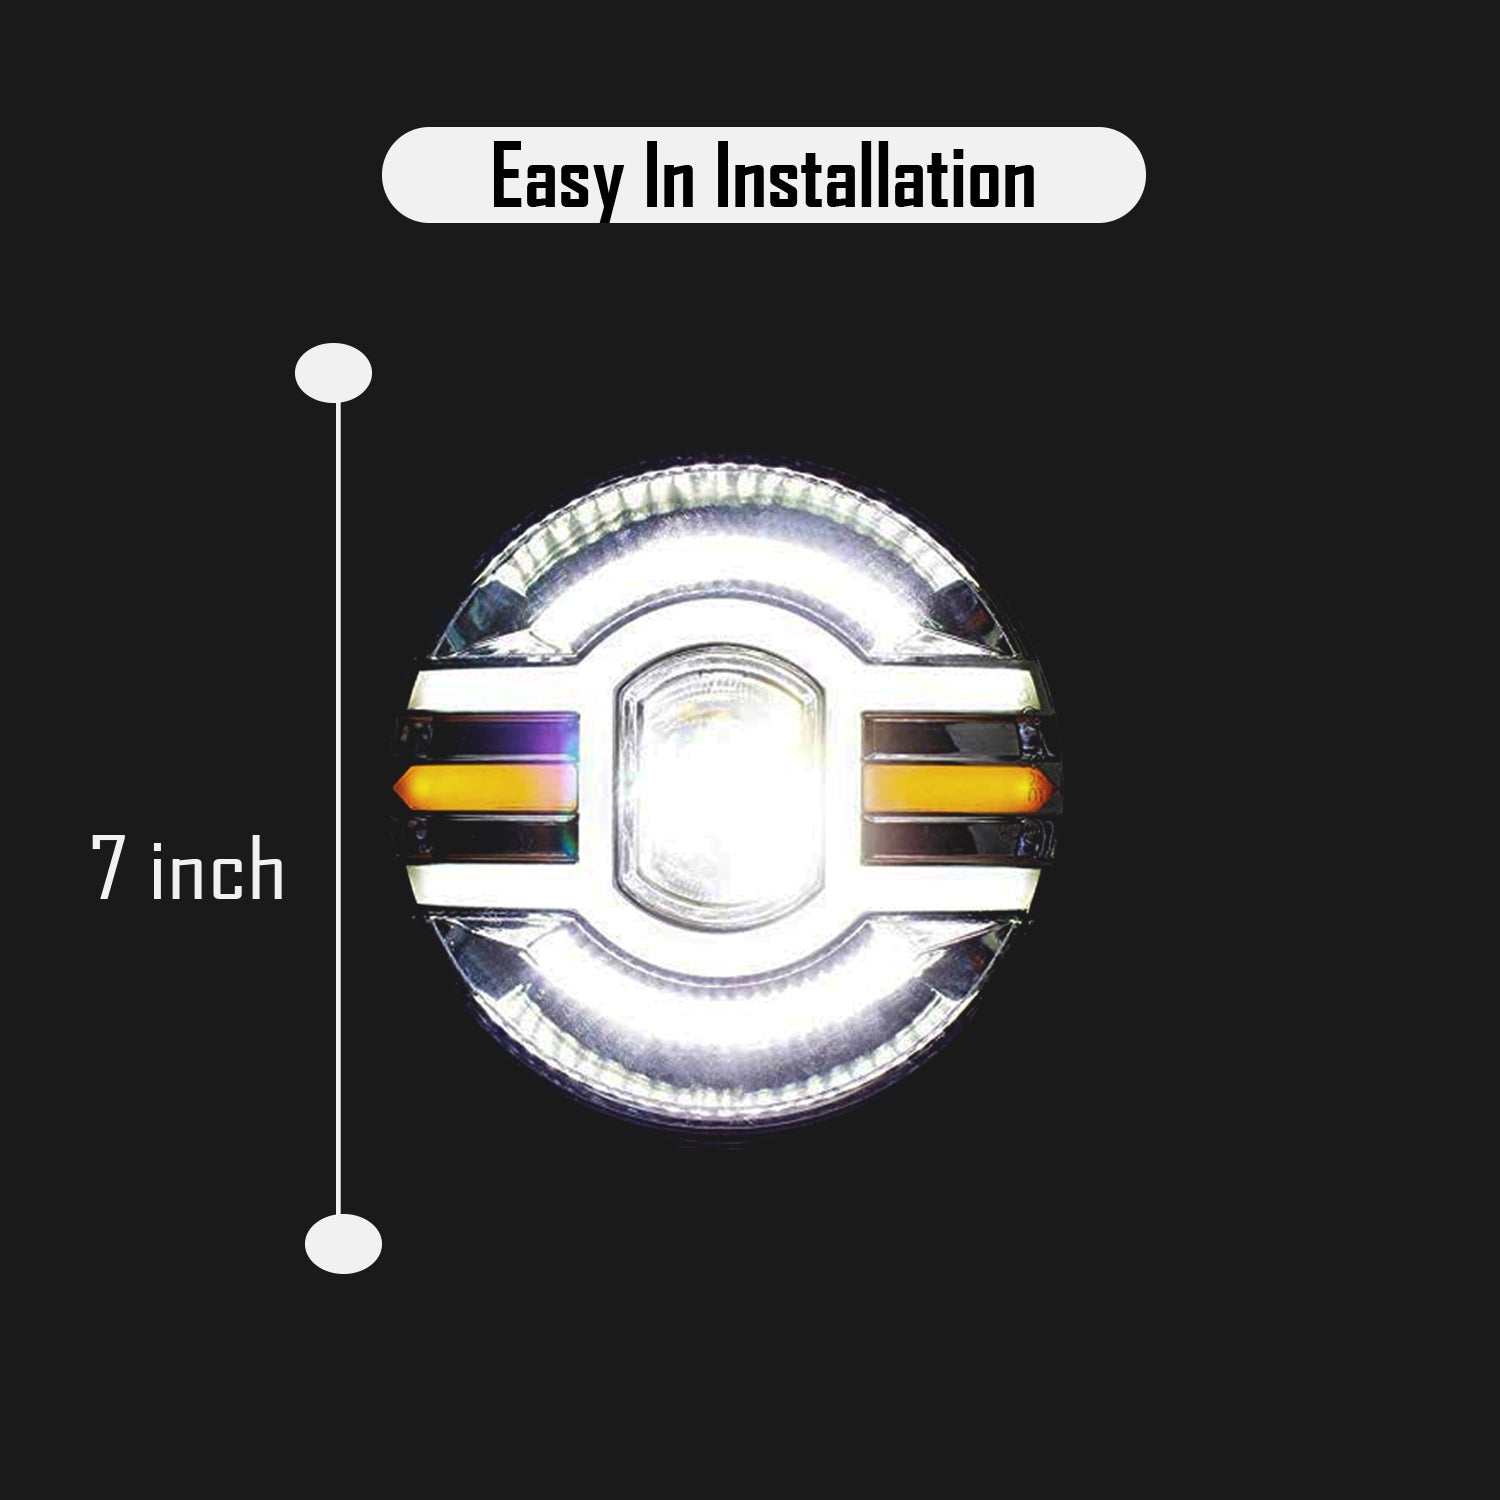 7 inch Harley Led Headlight for Royal Enfield (All Models) 60W